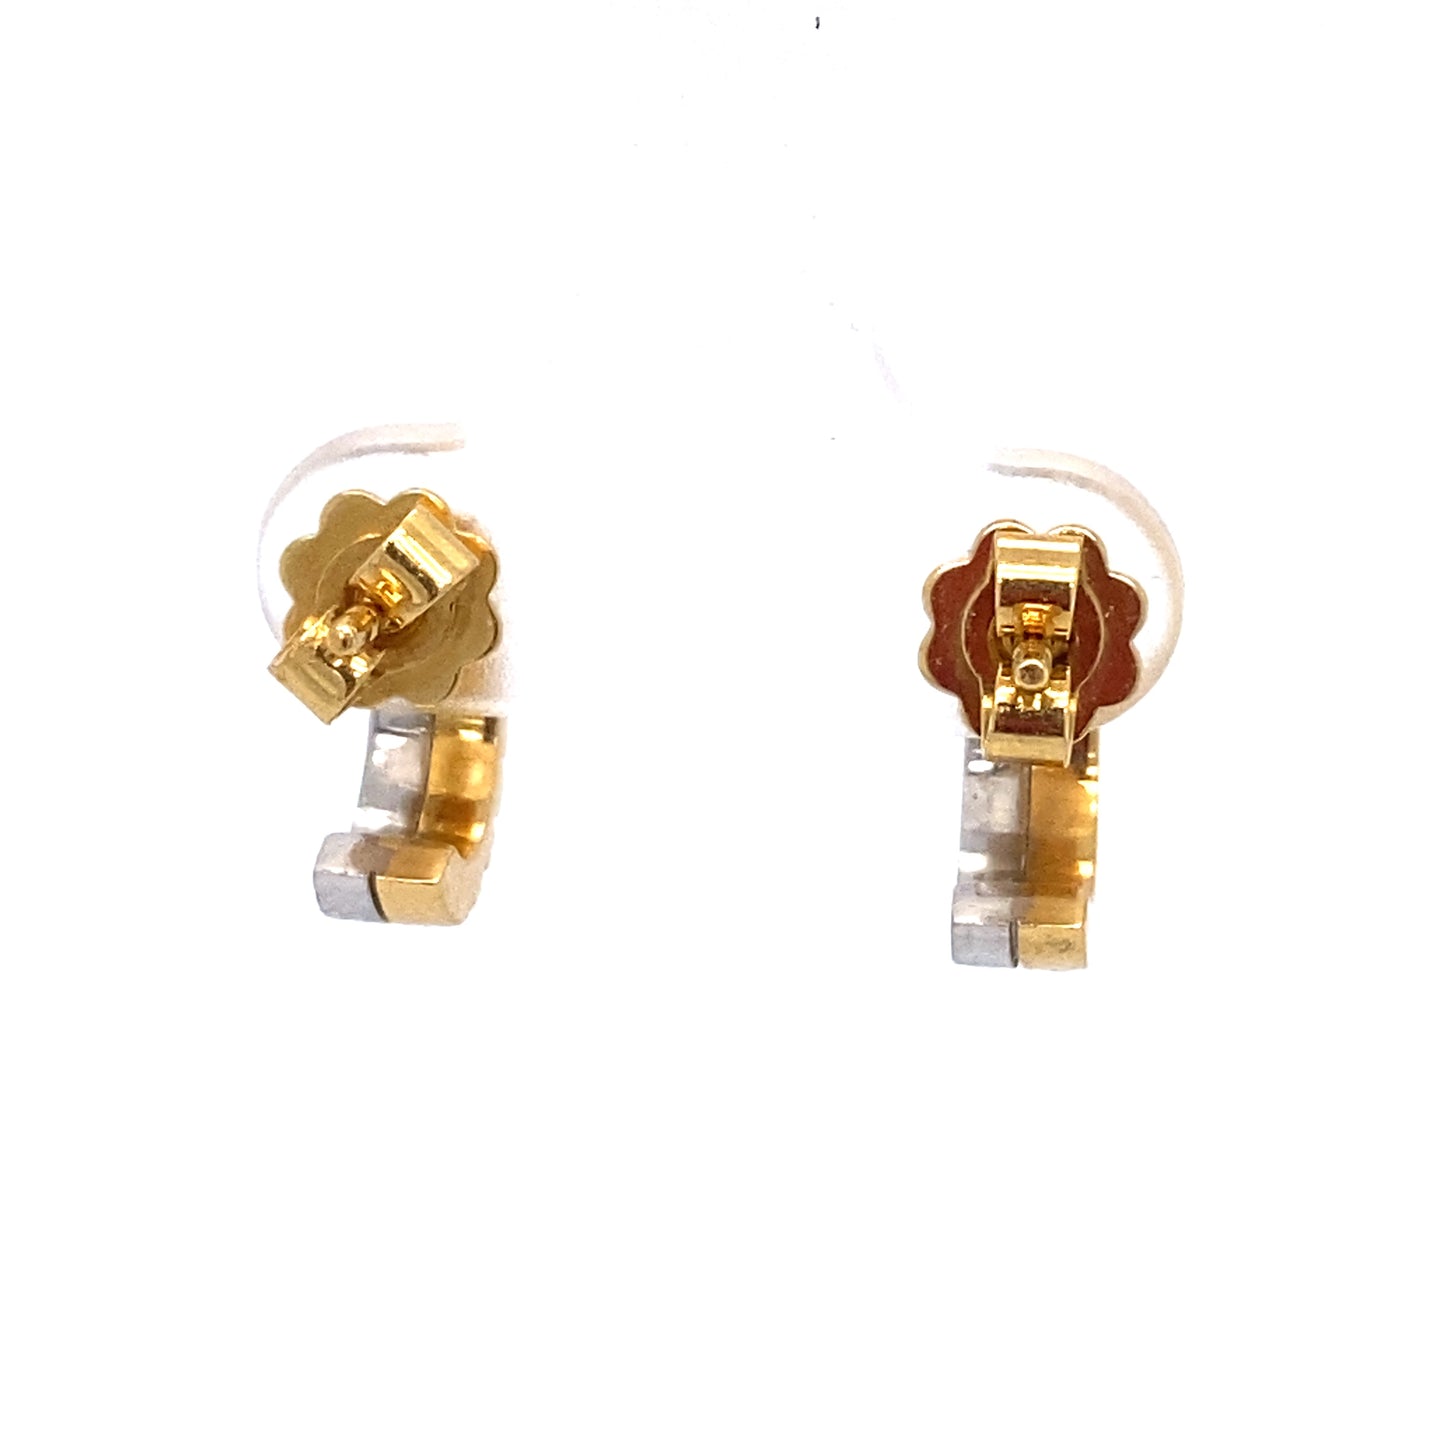 Circa 1950 Two-Tone J Hoop Earrings in 18K White and Yellow Gold